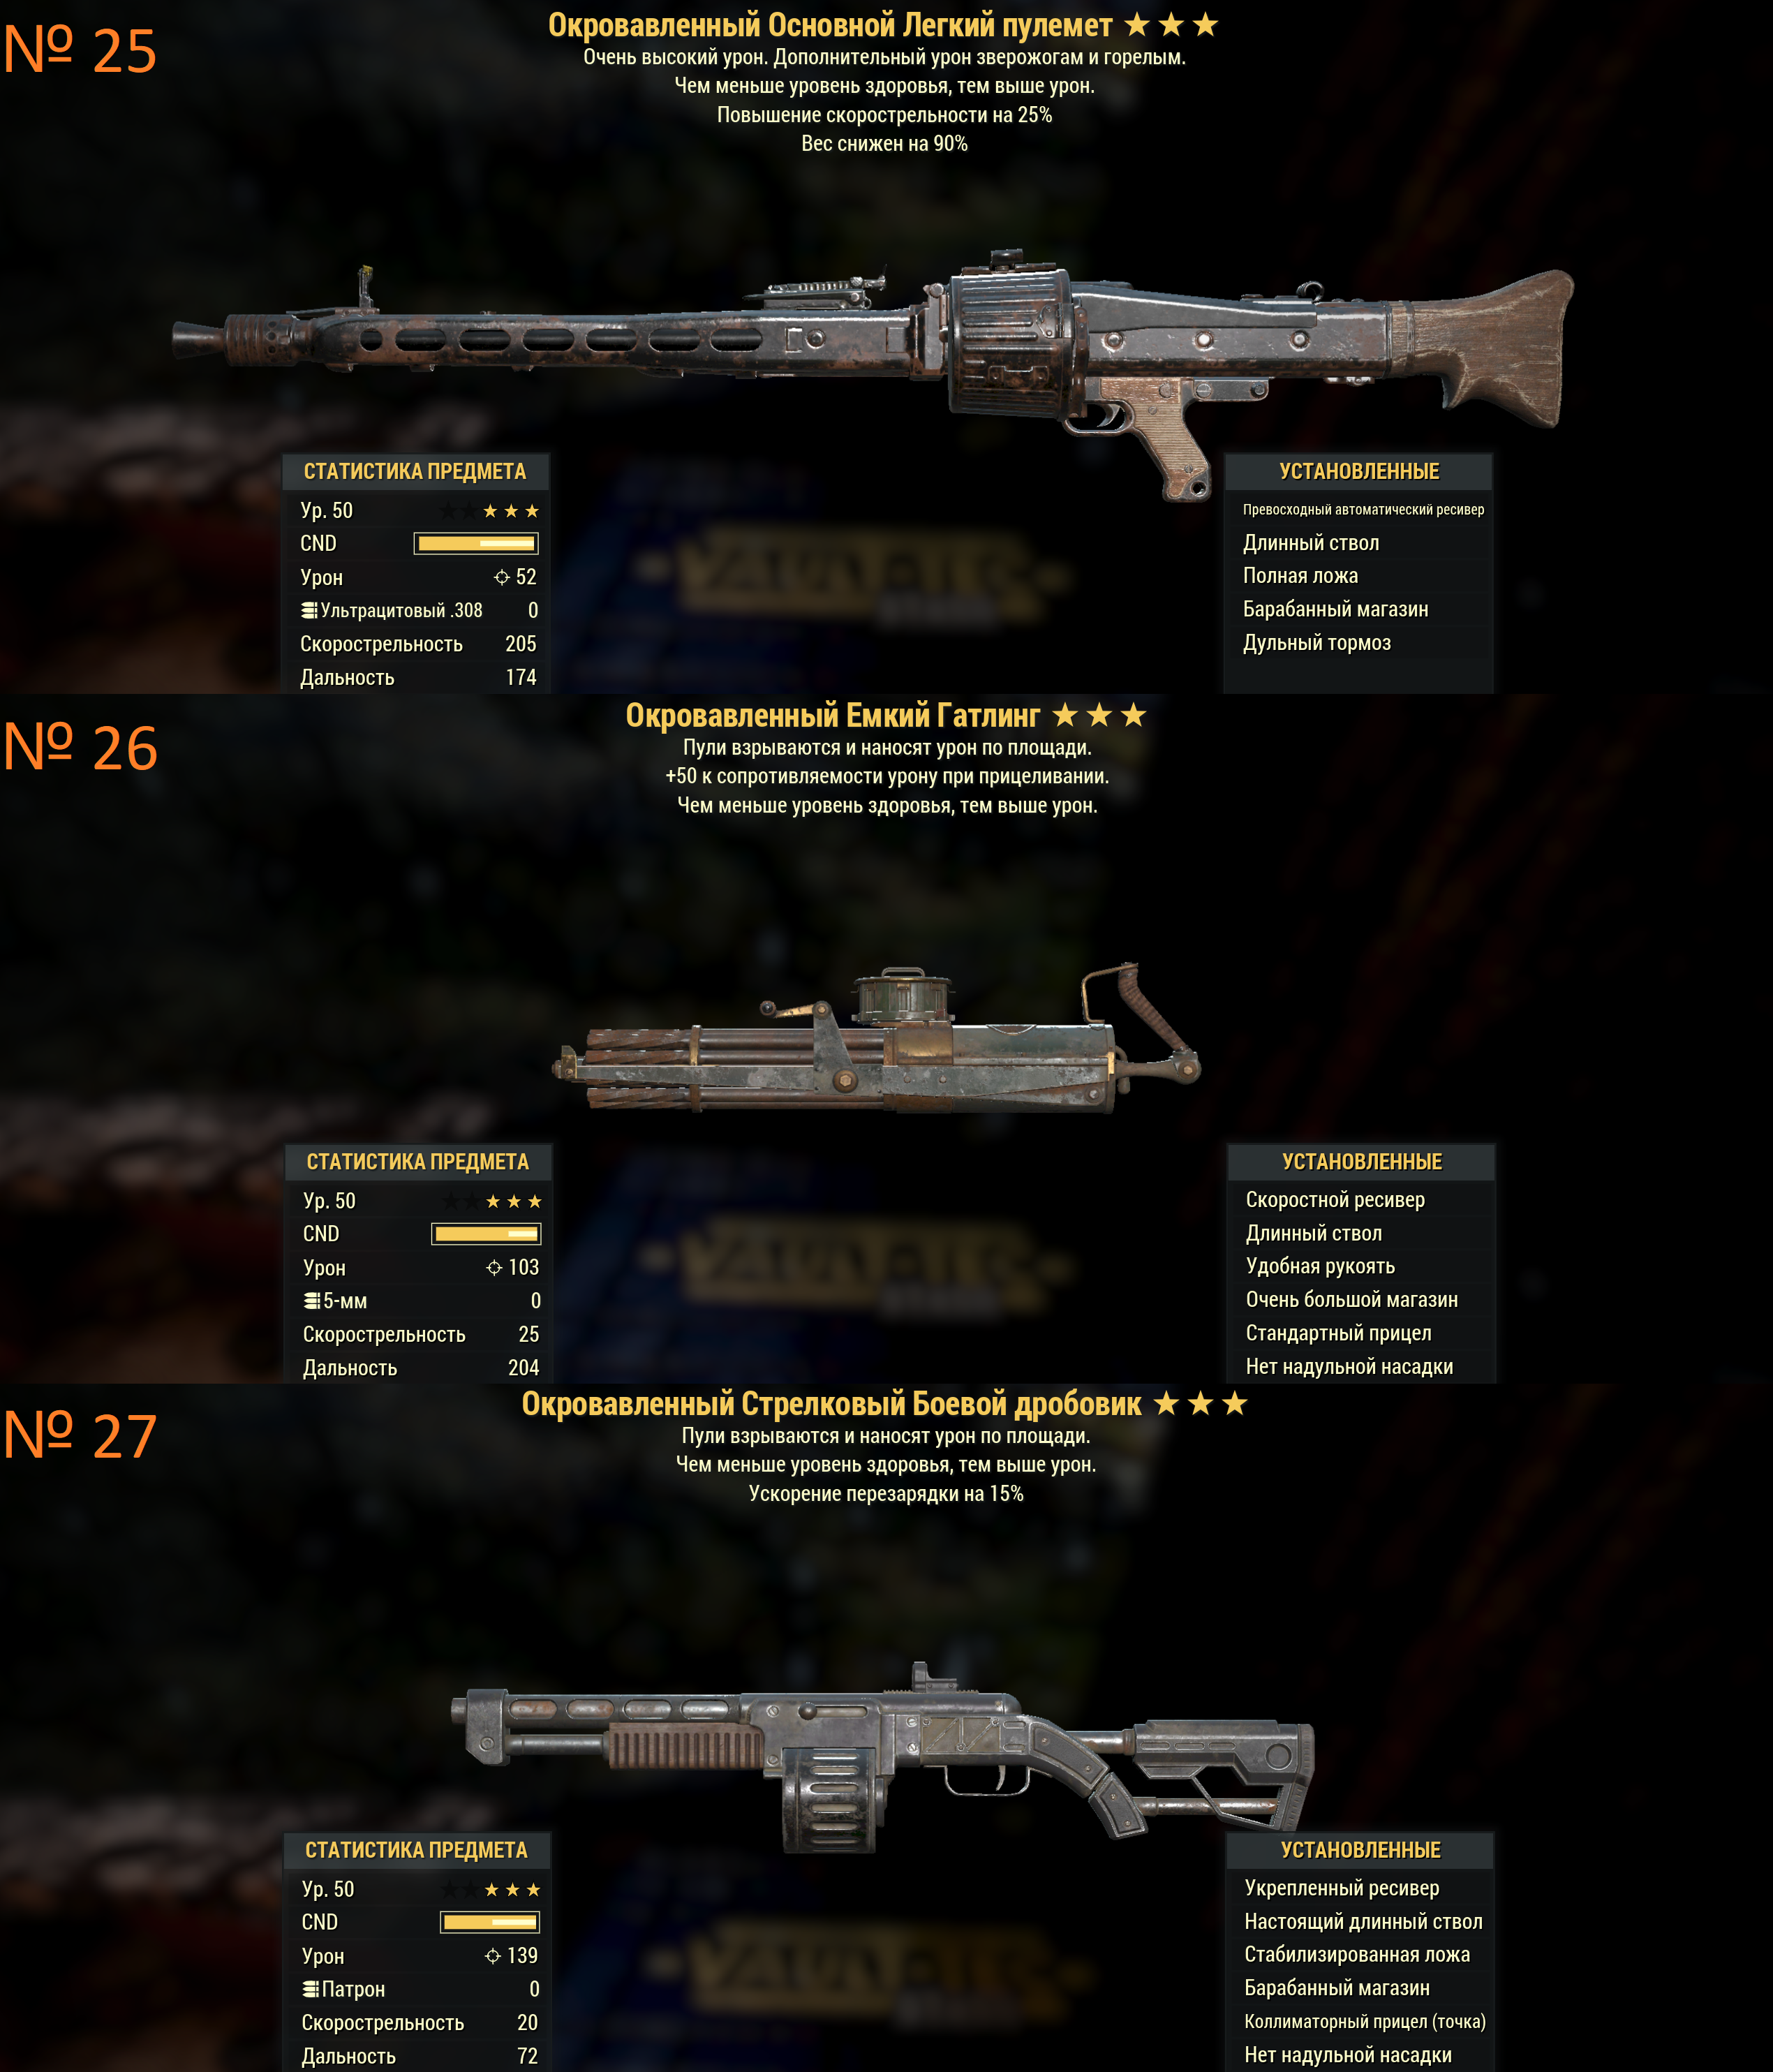 Buy Fallout 76 | Best Legendary Weapons! Best price! (PC) and download